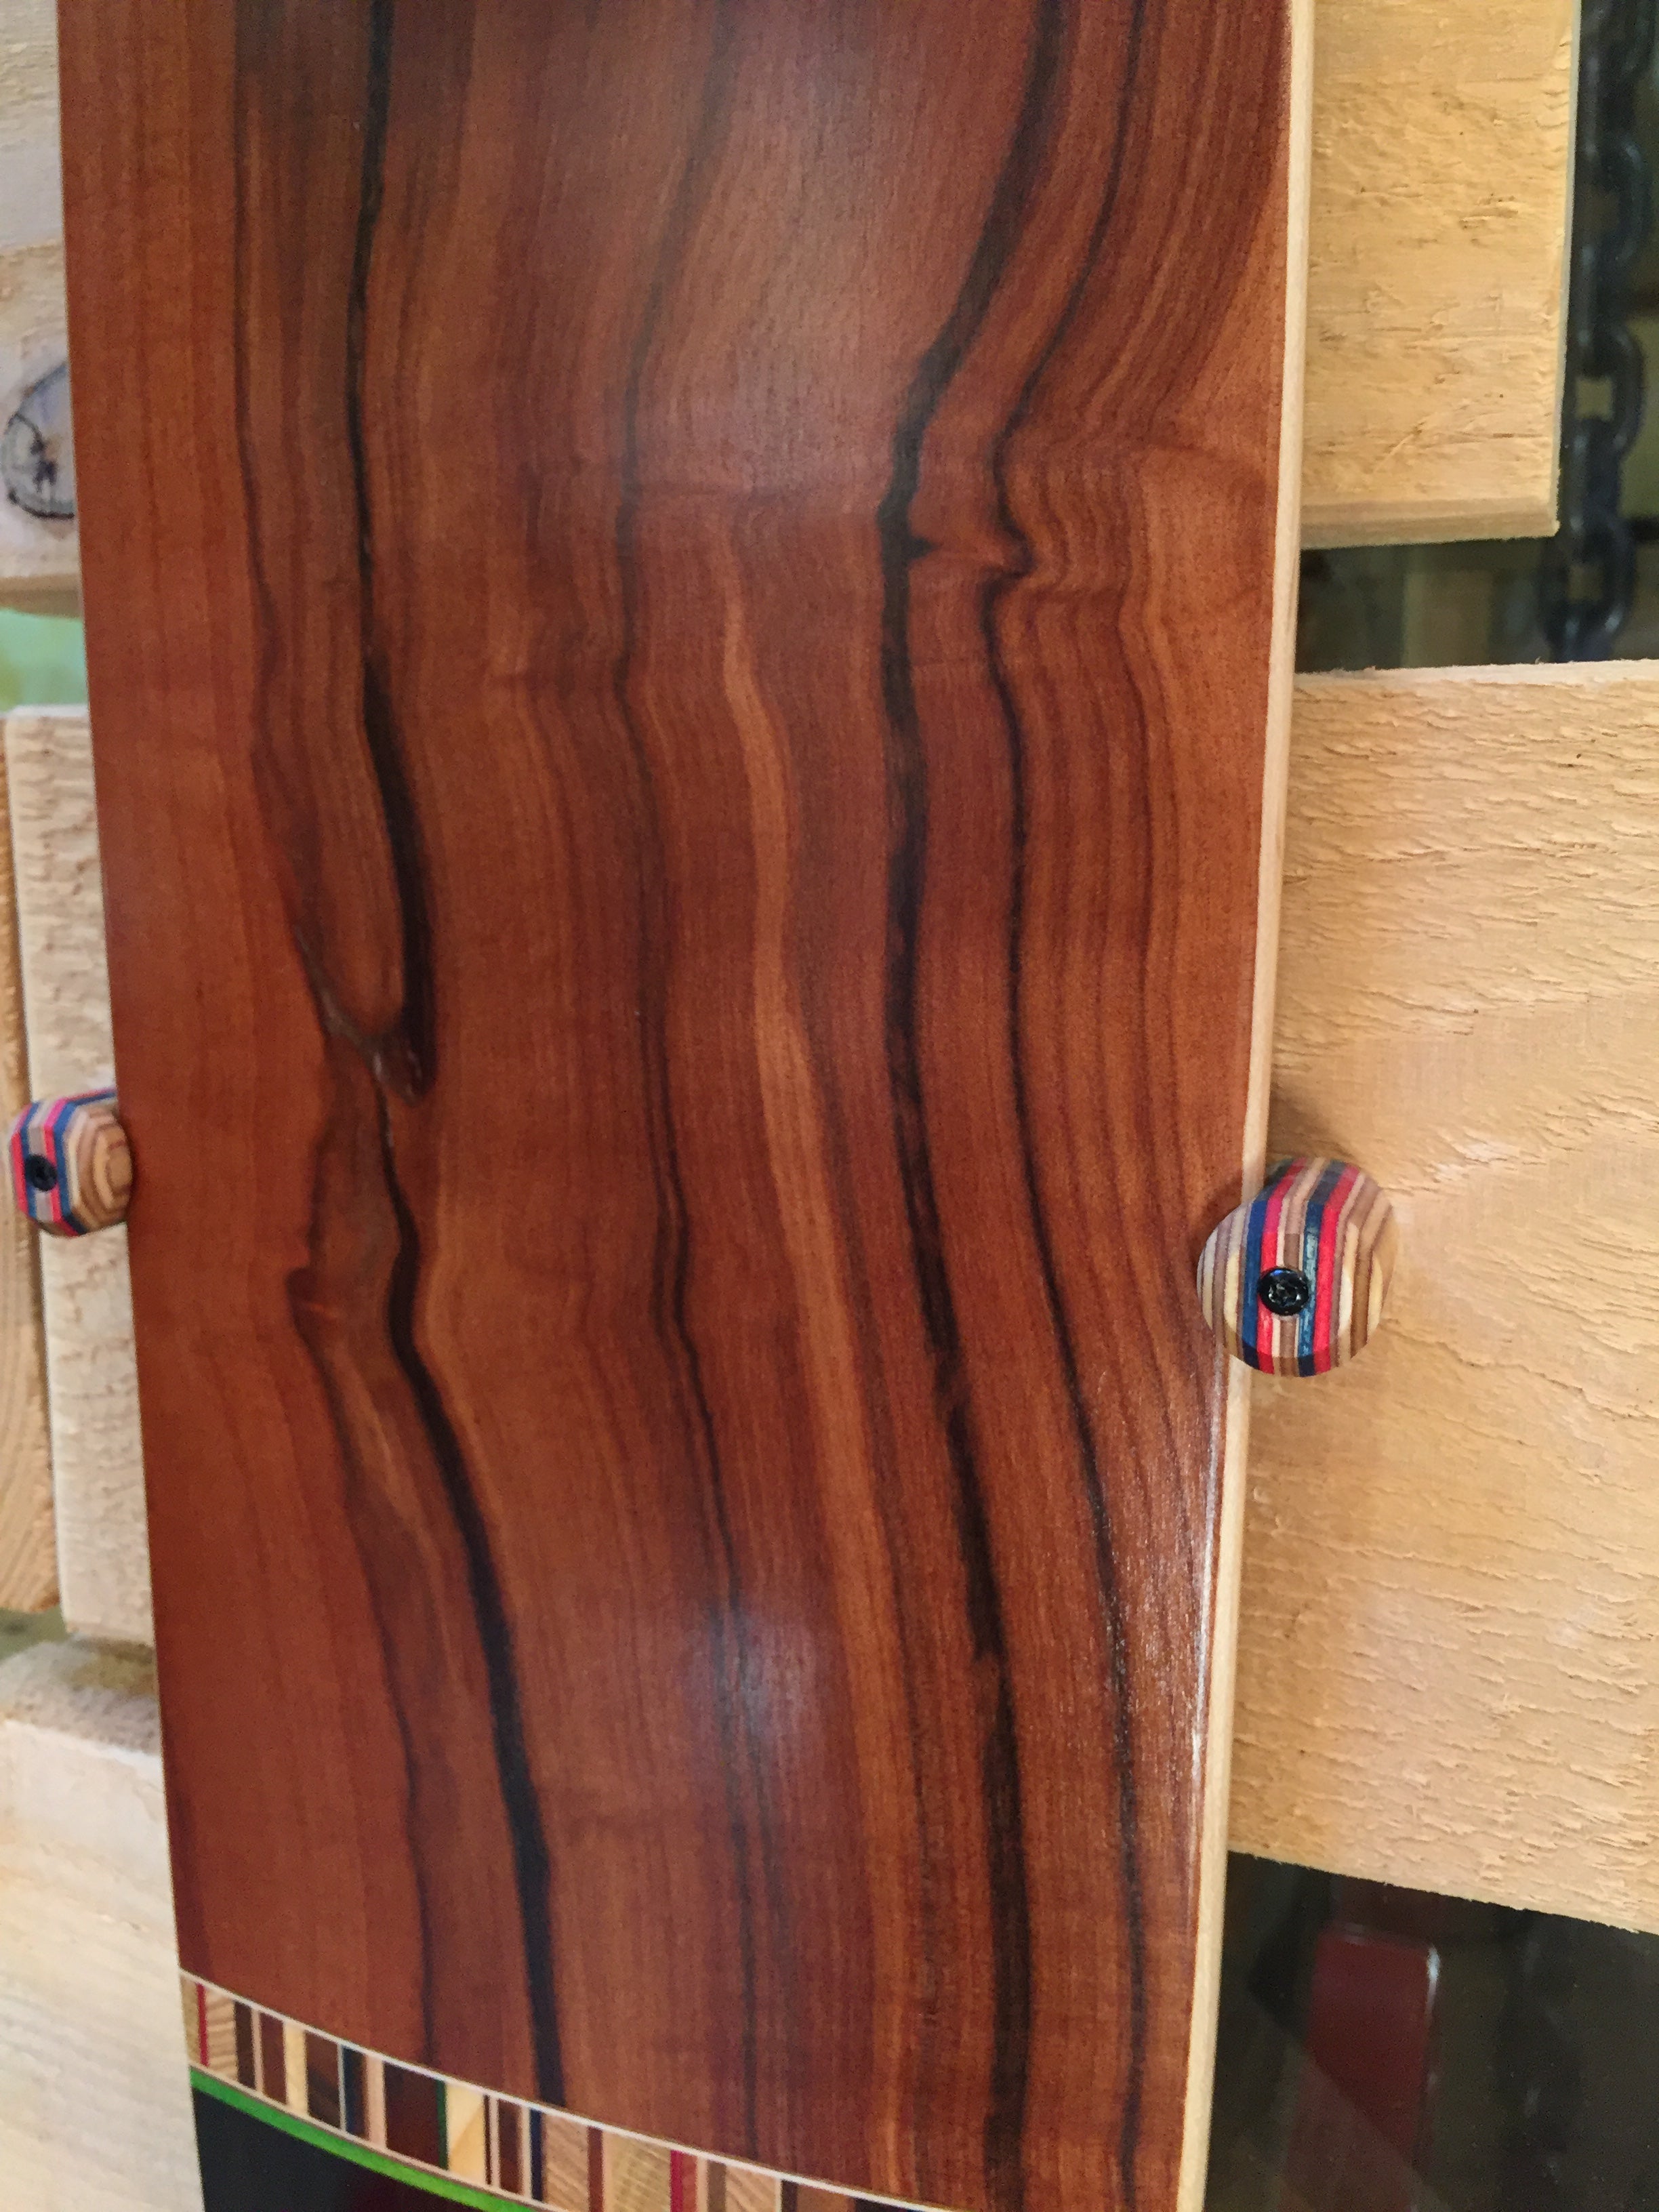 LGS Hangers for Sk8- and Longboards